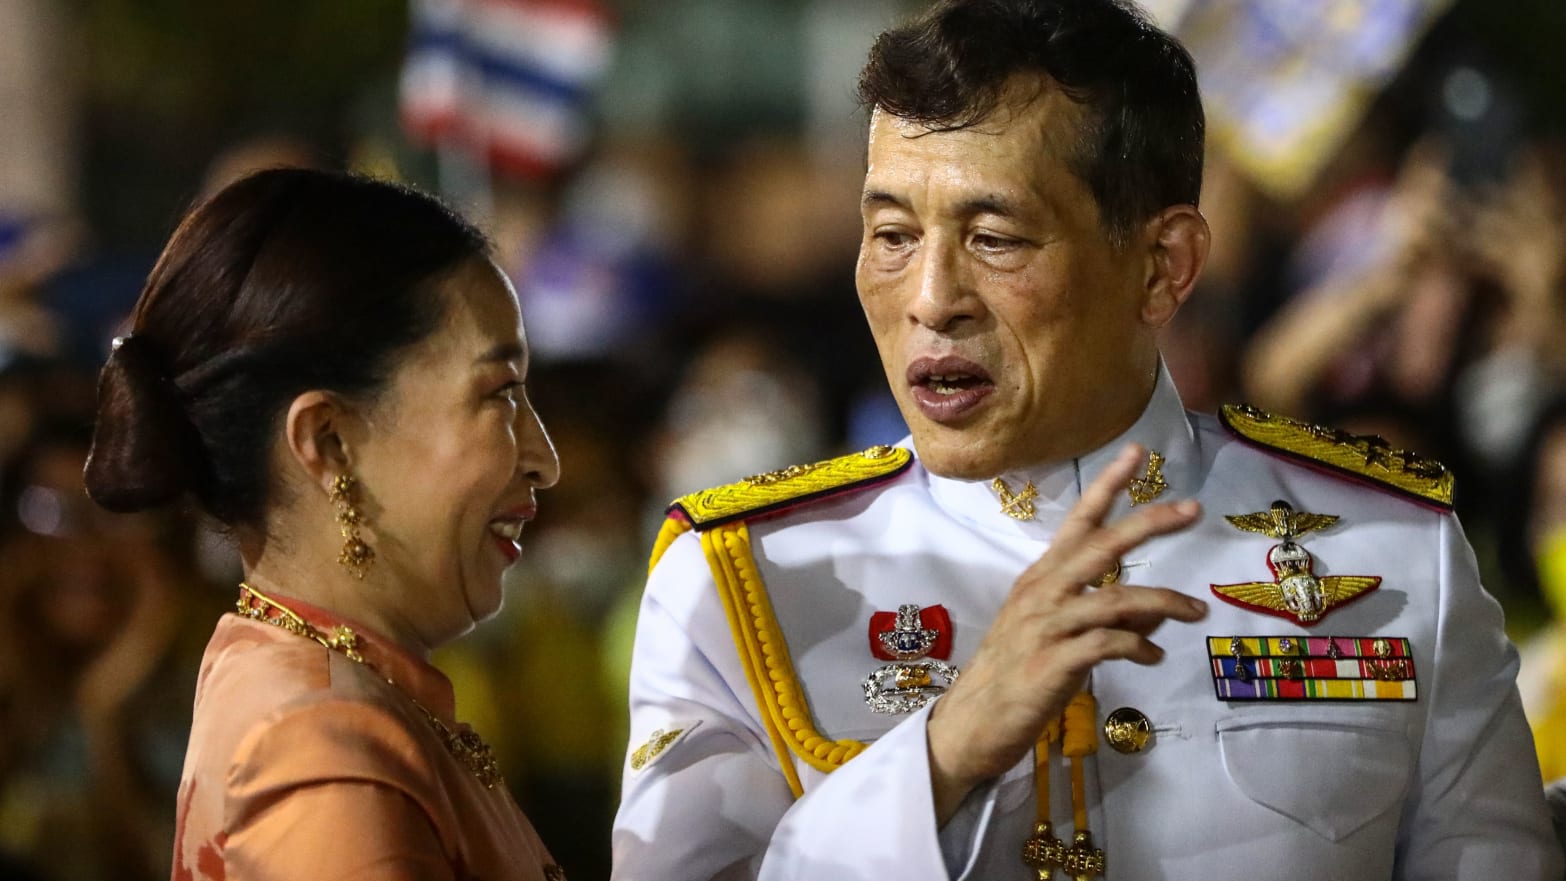 Thailand King Allegedly Broke His Sister’s Ankles For Questioning His Rule